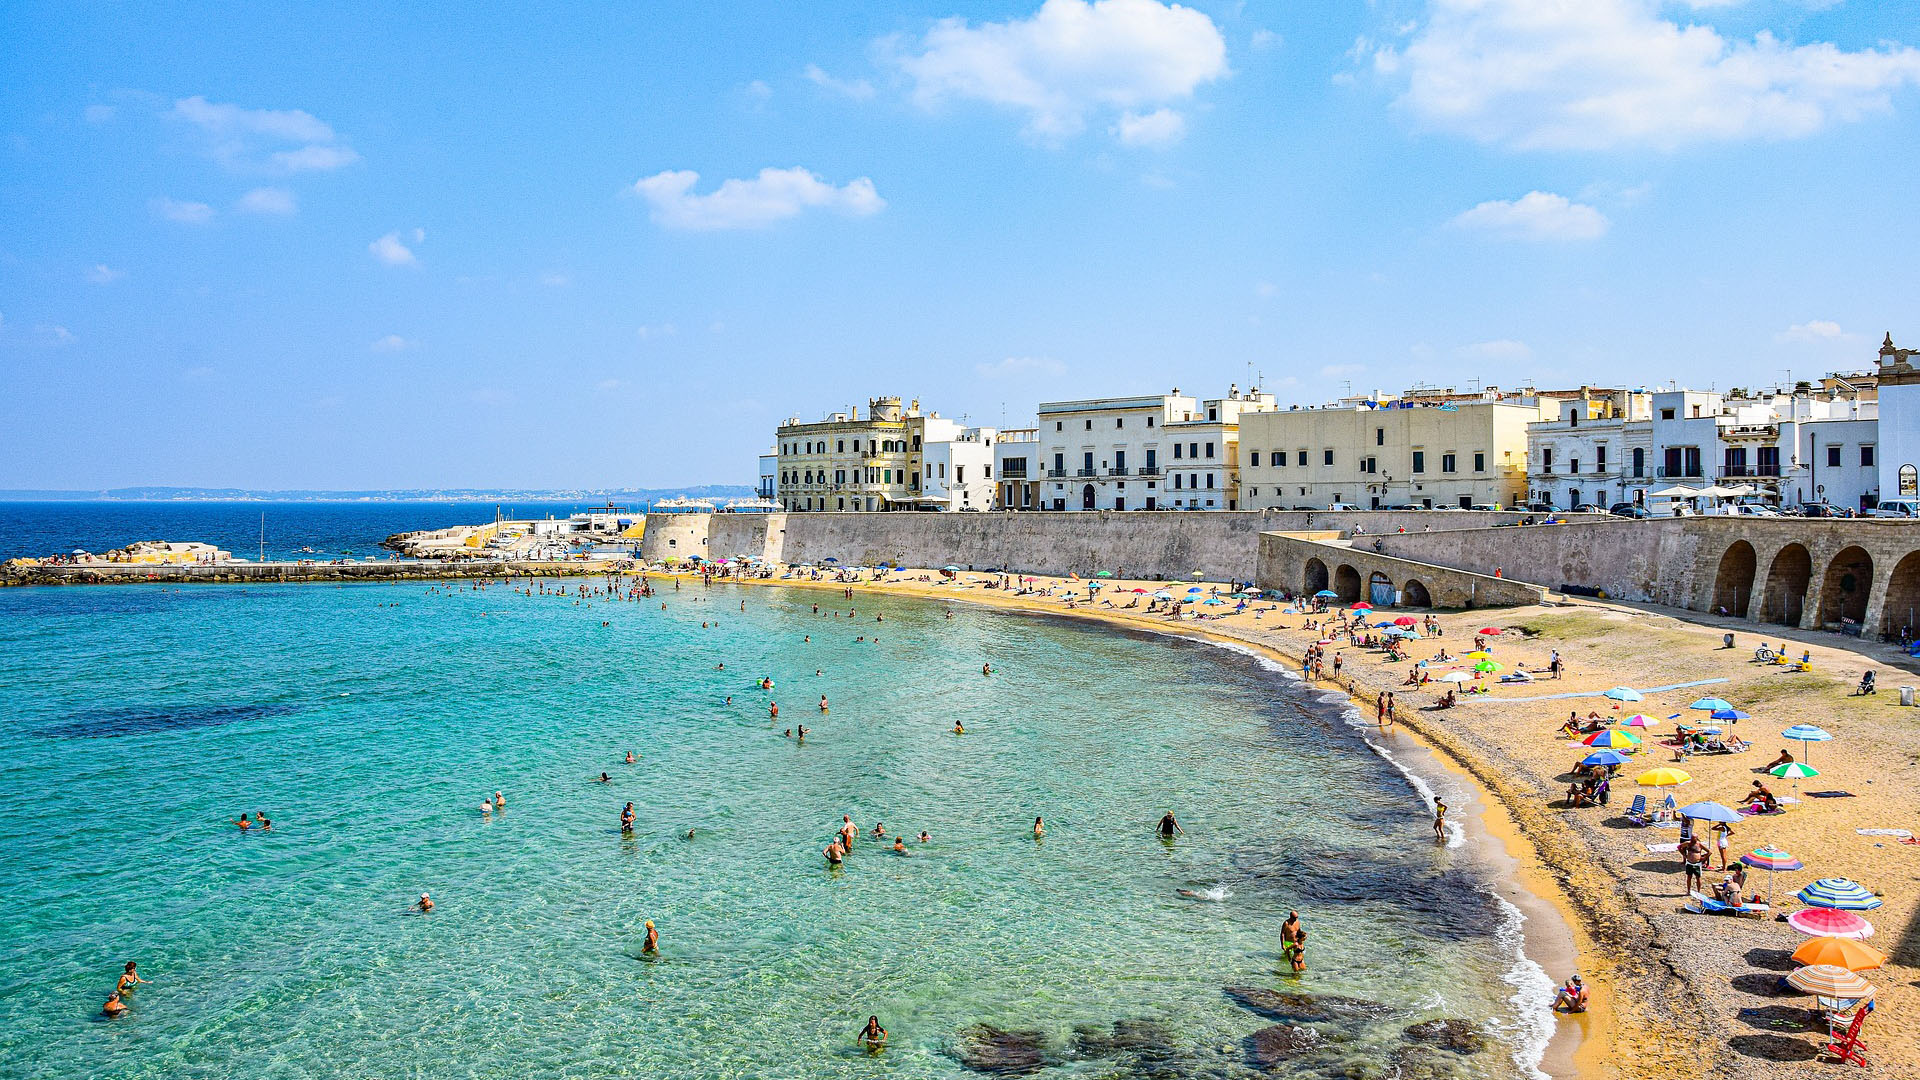 Pearls of the South:
14 day trip to discover the natural hidden beauties of Southern Italy.